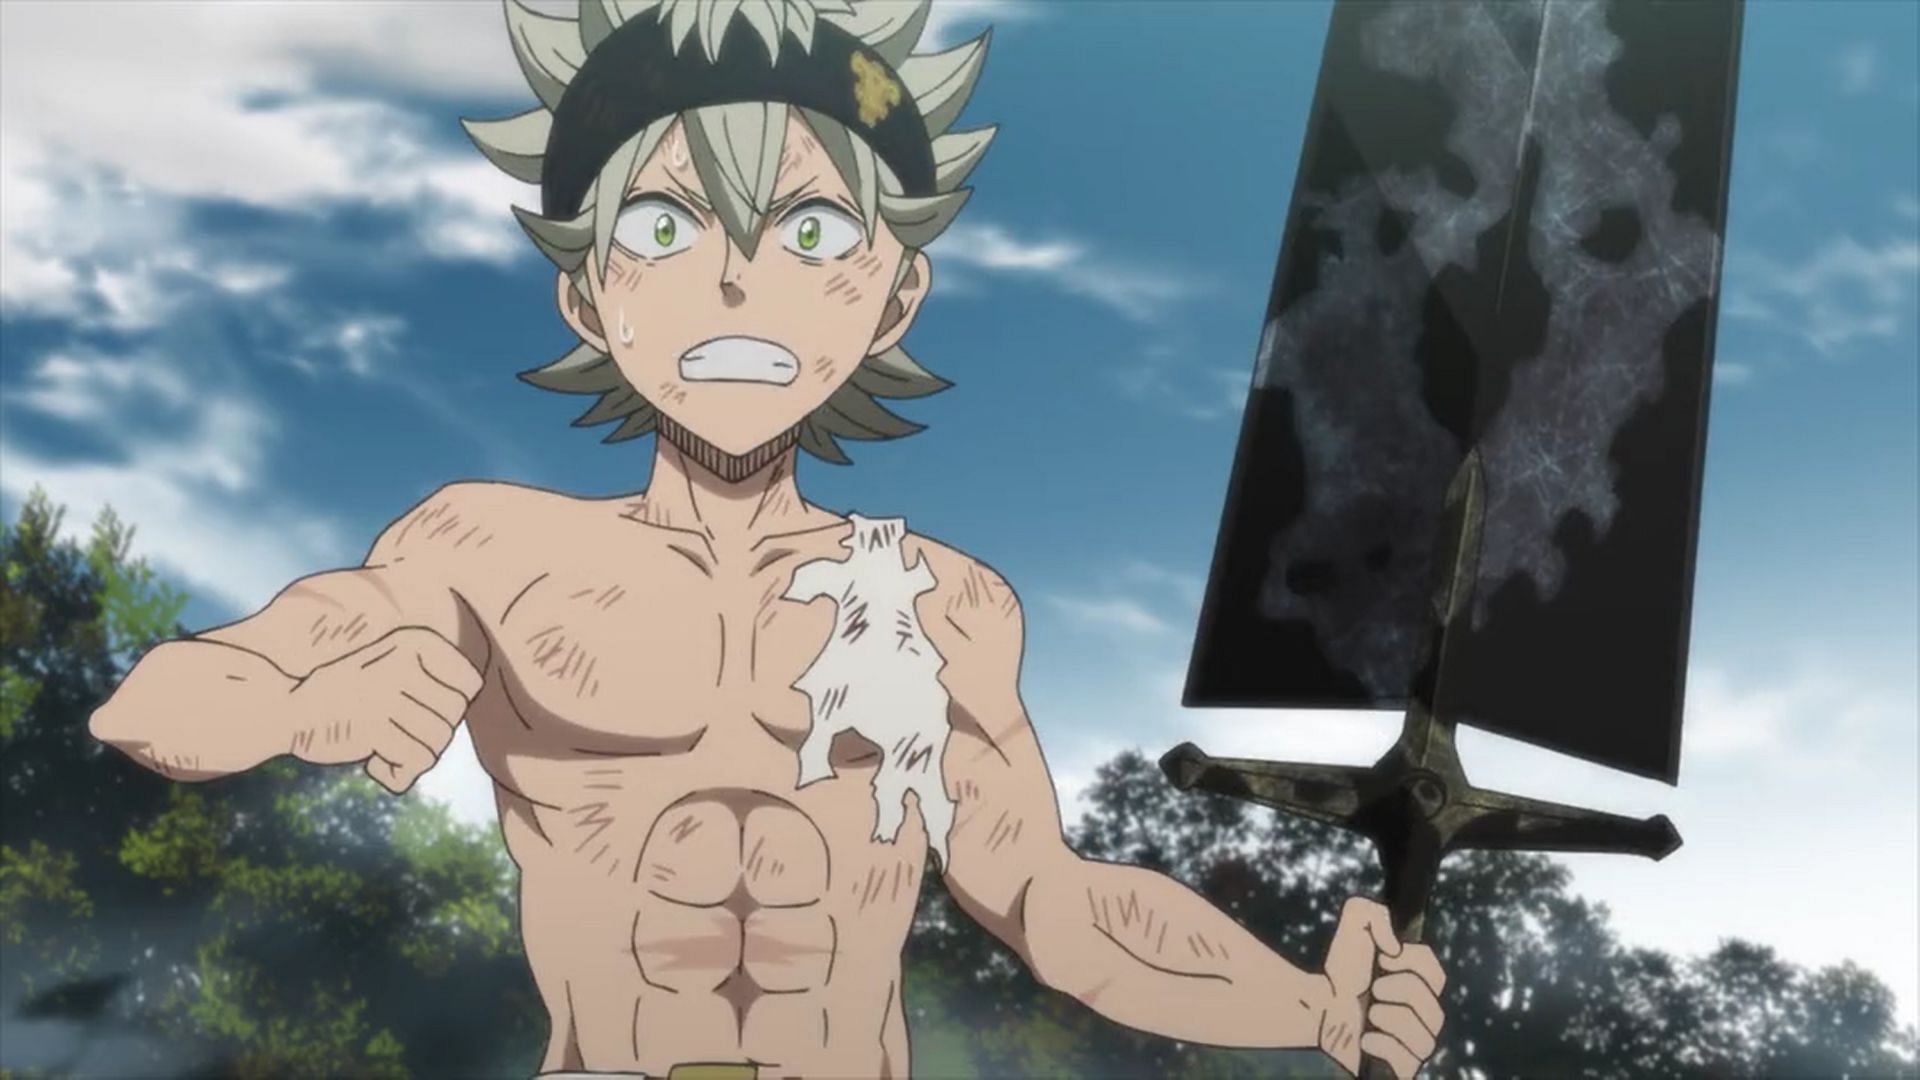 Black Clover chapter 344: Release date and time, what to expect, and more (Image via Studio Pierrot)